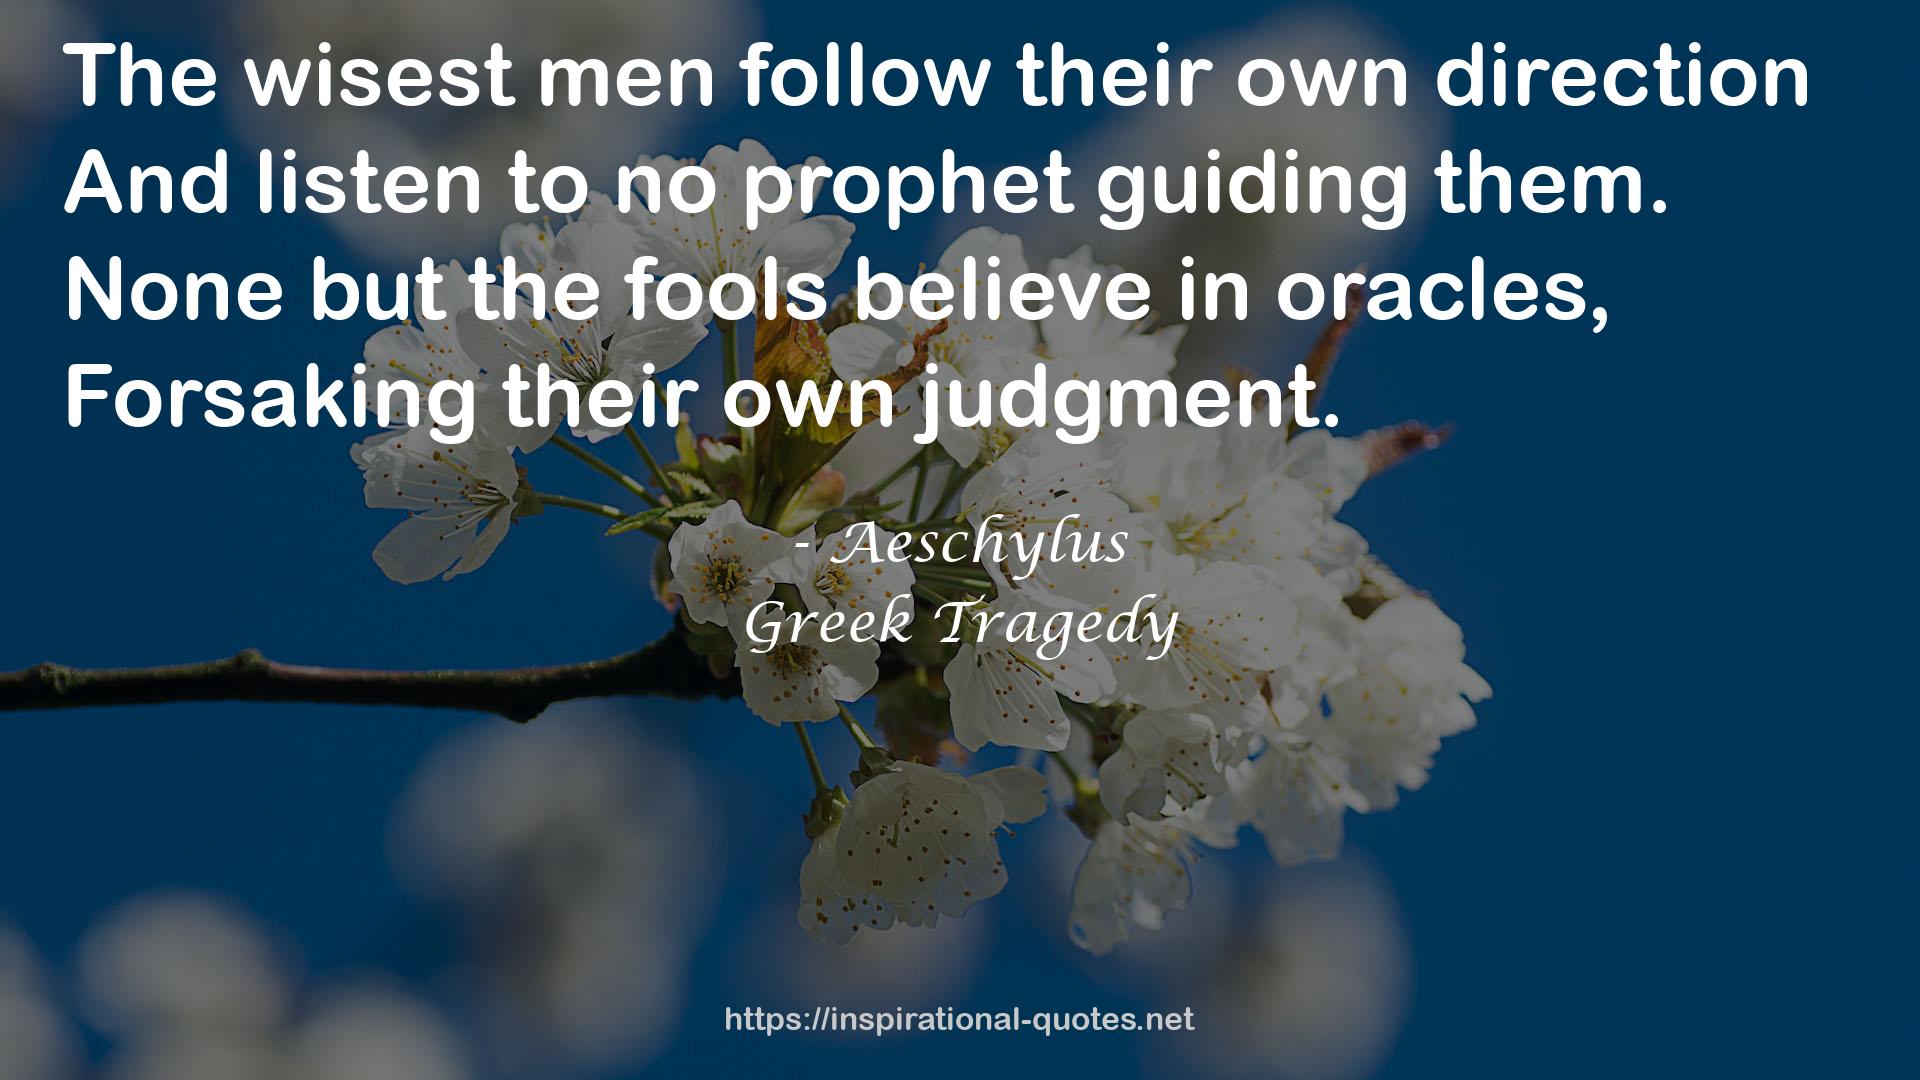 Greek Tragedy QUOTES